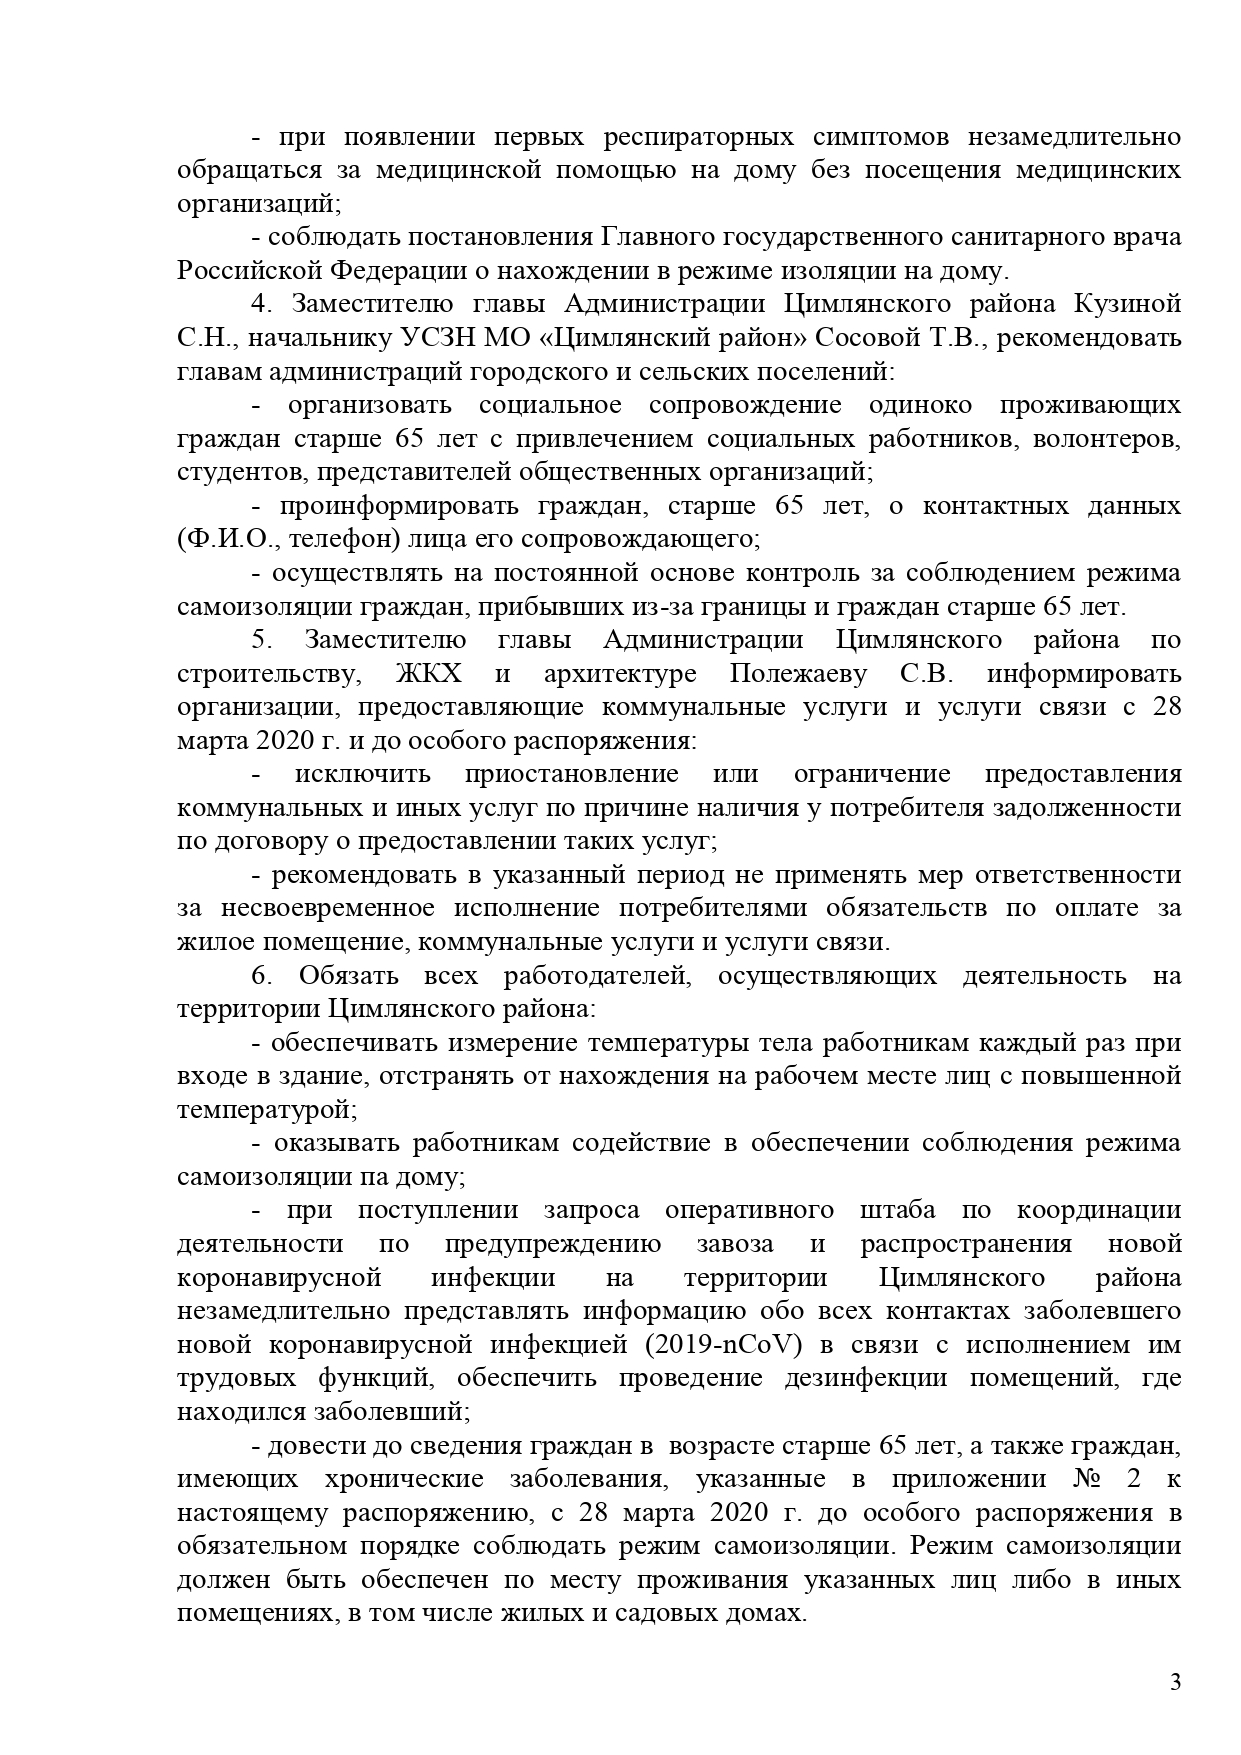 50 р 27.03.2020 page 0003